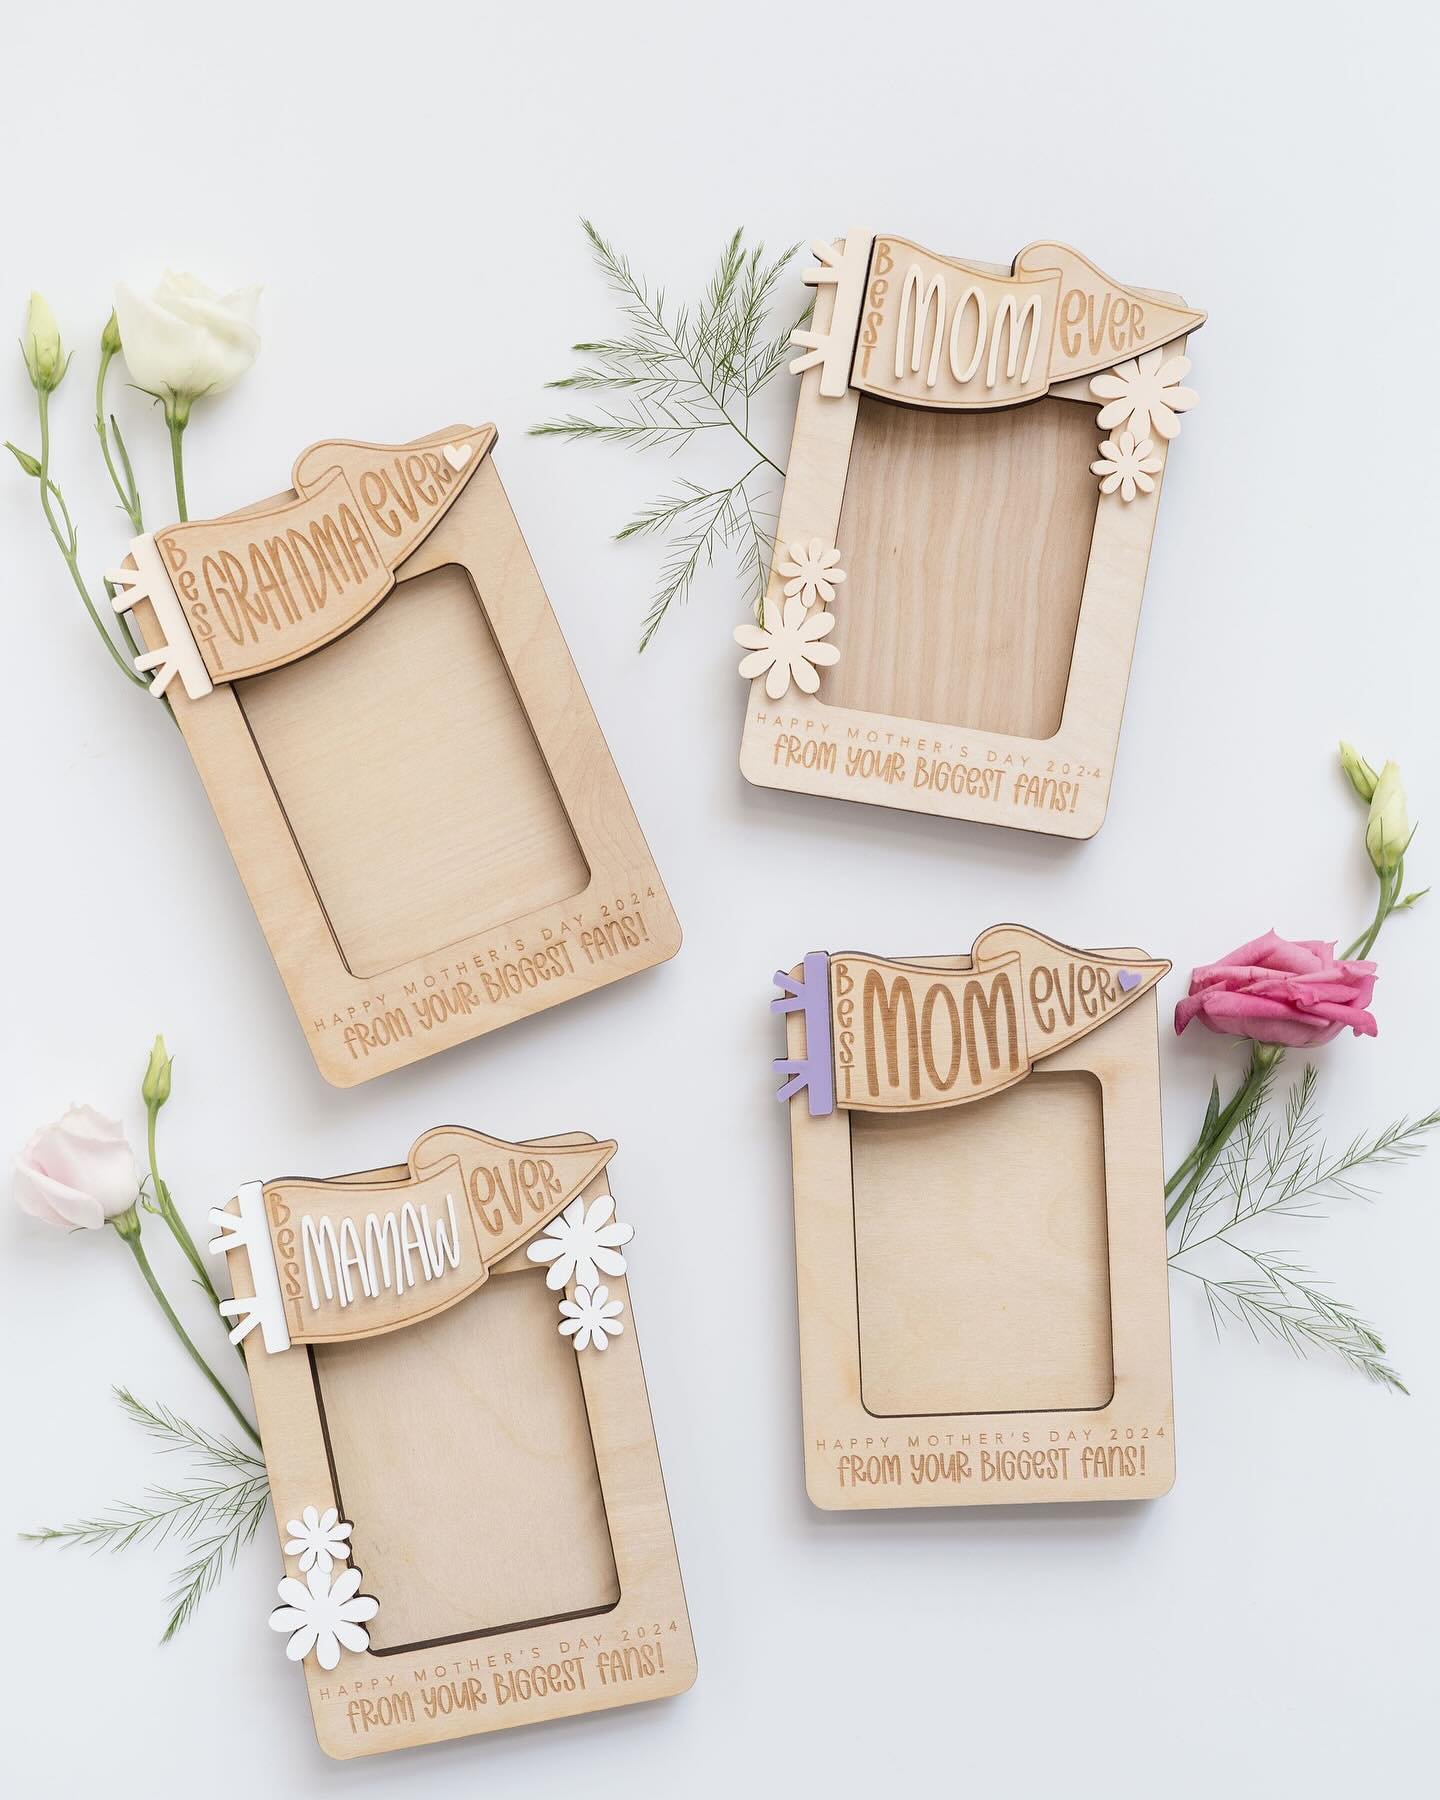 Mother&rsquo;s Day gifts are here!!! 🌷☀️ These cutie little frames are magnetic and hold standard wallet size photos. Available in the shop! 

Product photos: @stewartimagery
#mothersday #mothersdaygift #giftideas #springday #lasercut #laserengravin